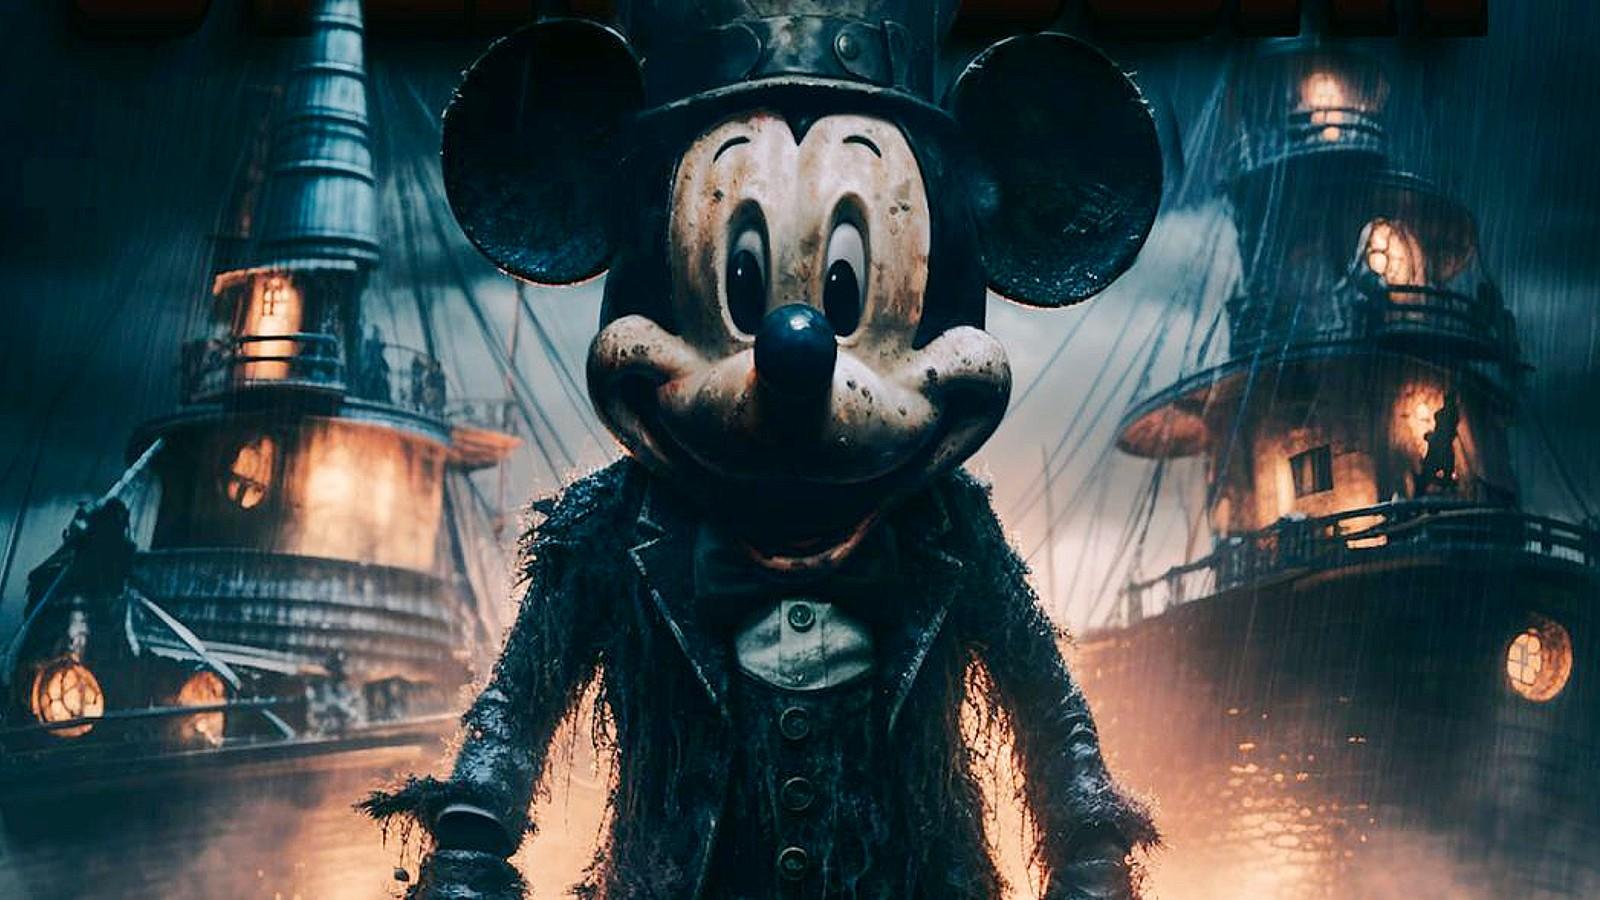 The fake poster for Steam Boat, a made-up Mickey Mouse Steamboat Willie movie directed by Rob Zombie